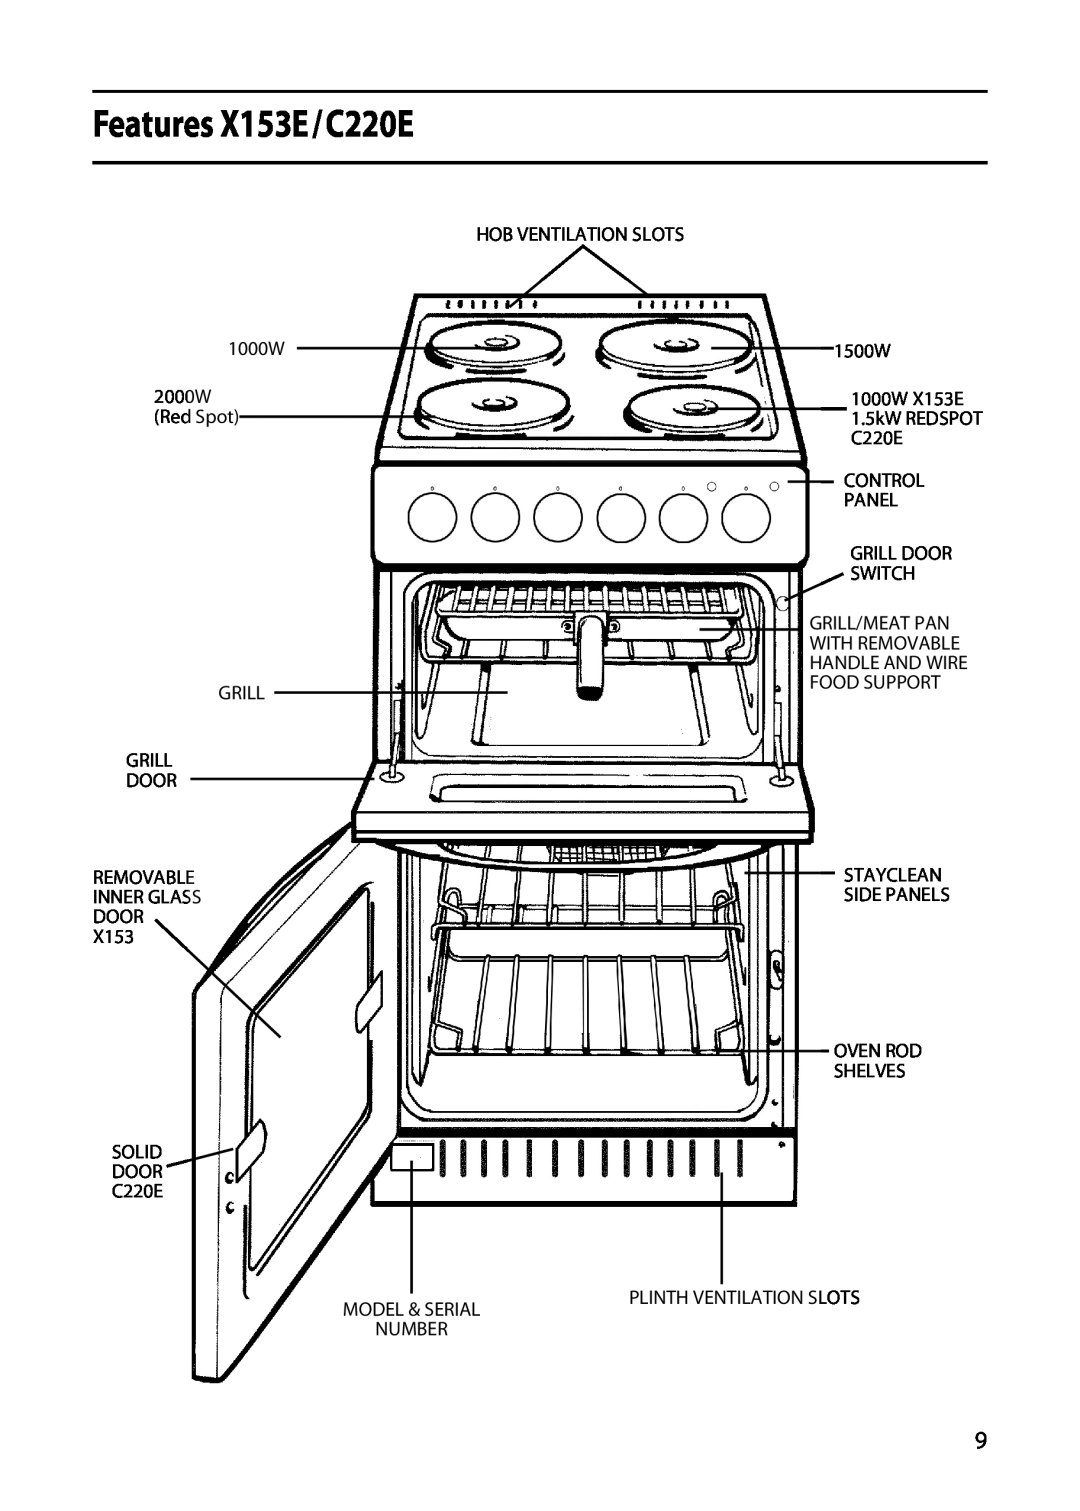 Hotpoint X253E, X156E manual Features X153E/C220E, 1000W, Grill Grill Door Removable Inner Glass Door, SOLID DOOR C220E 